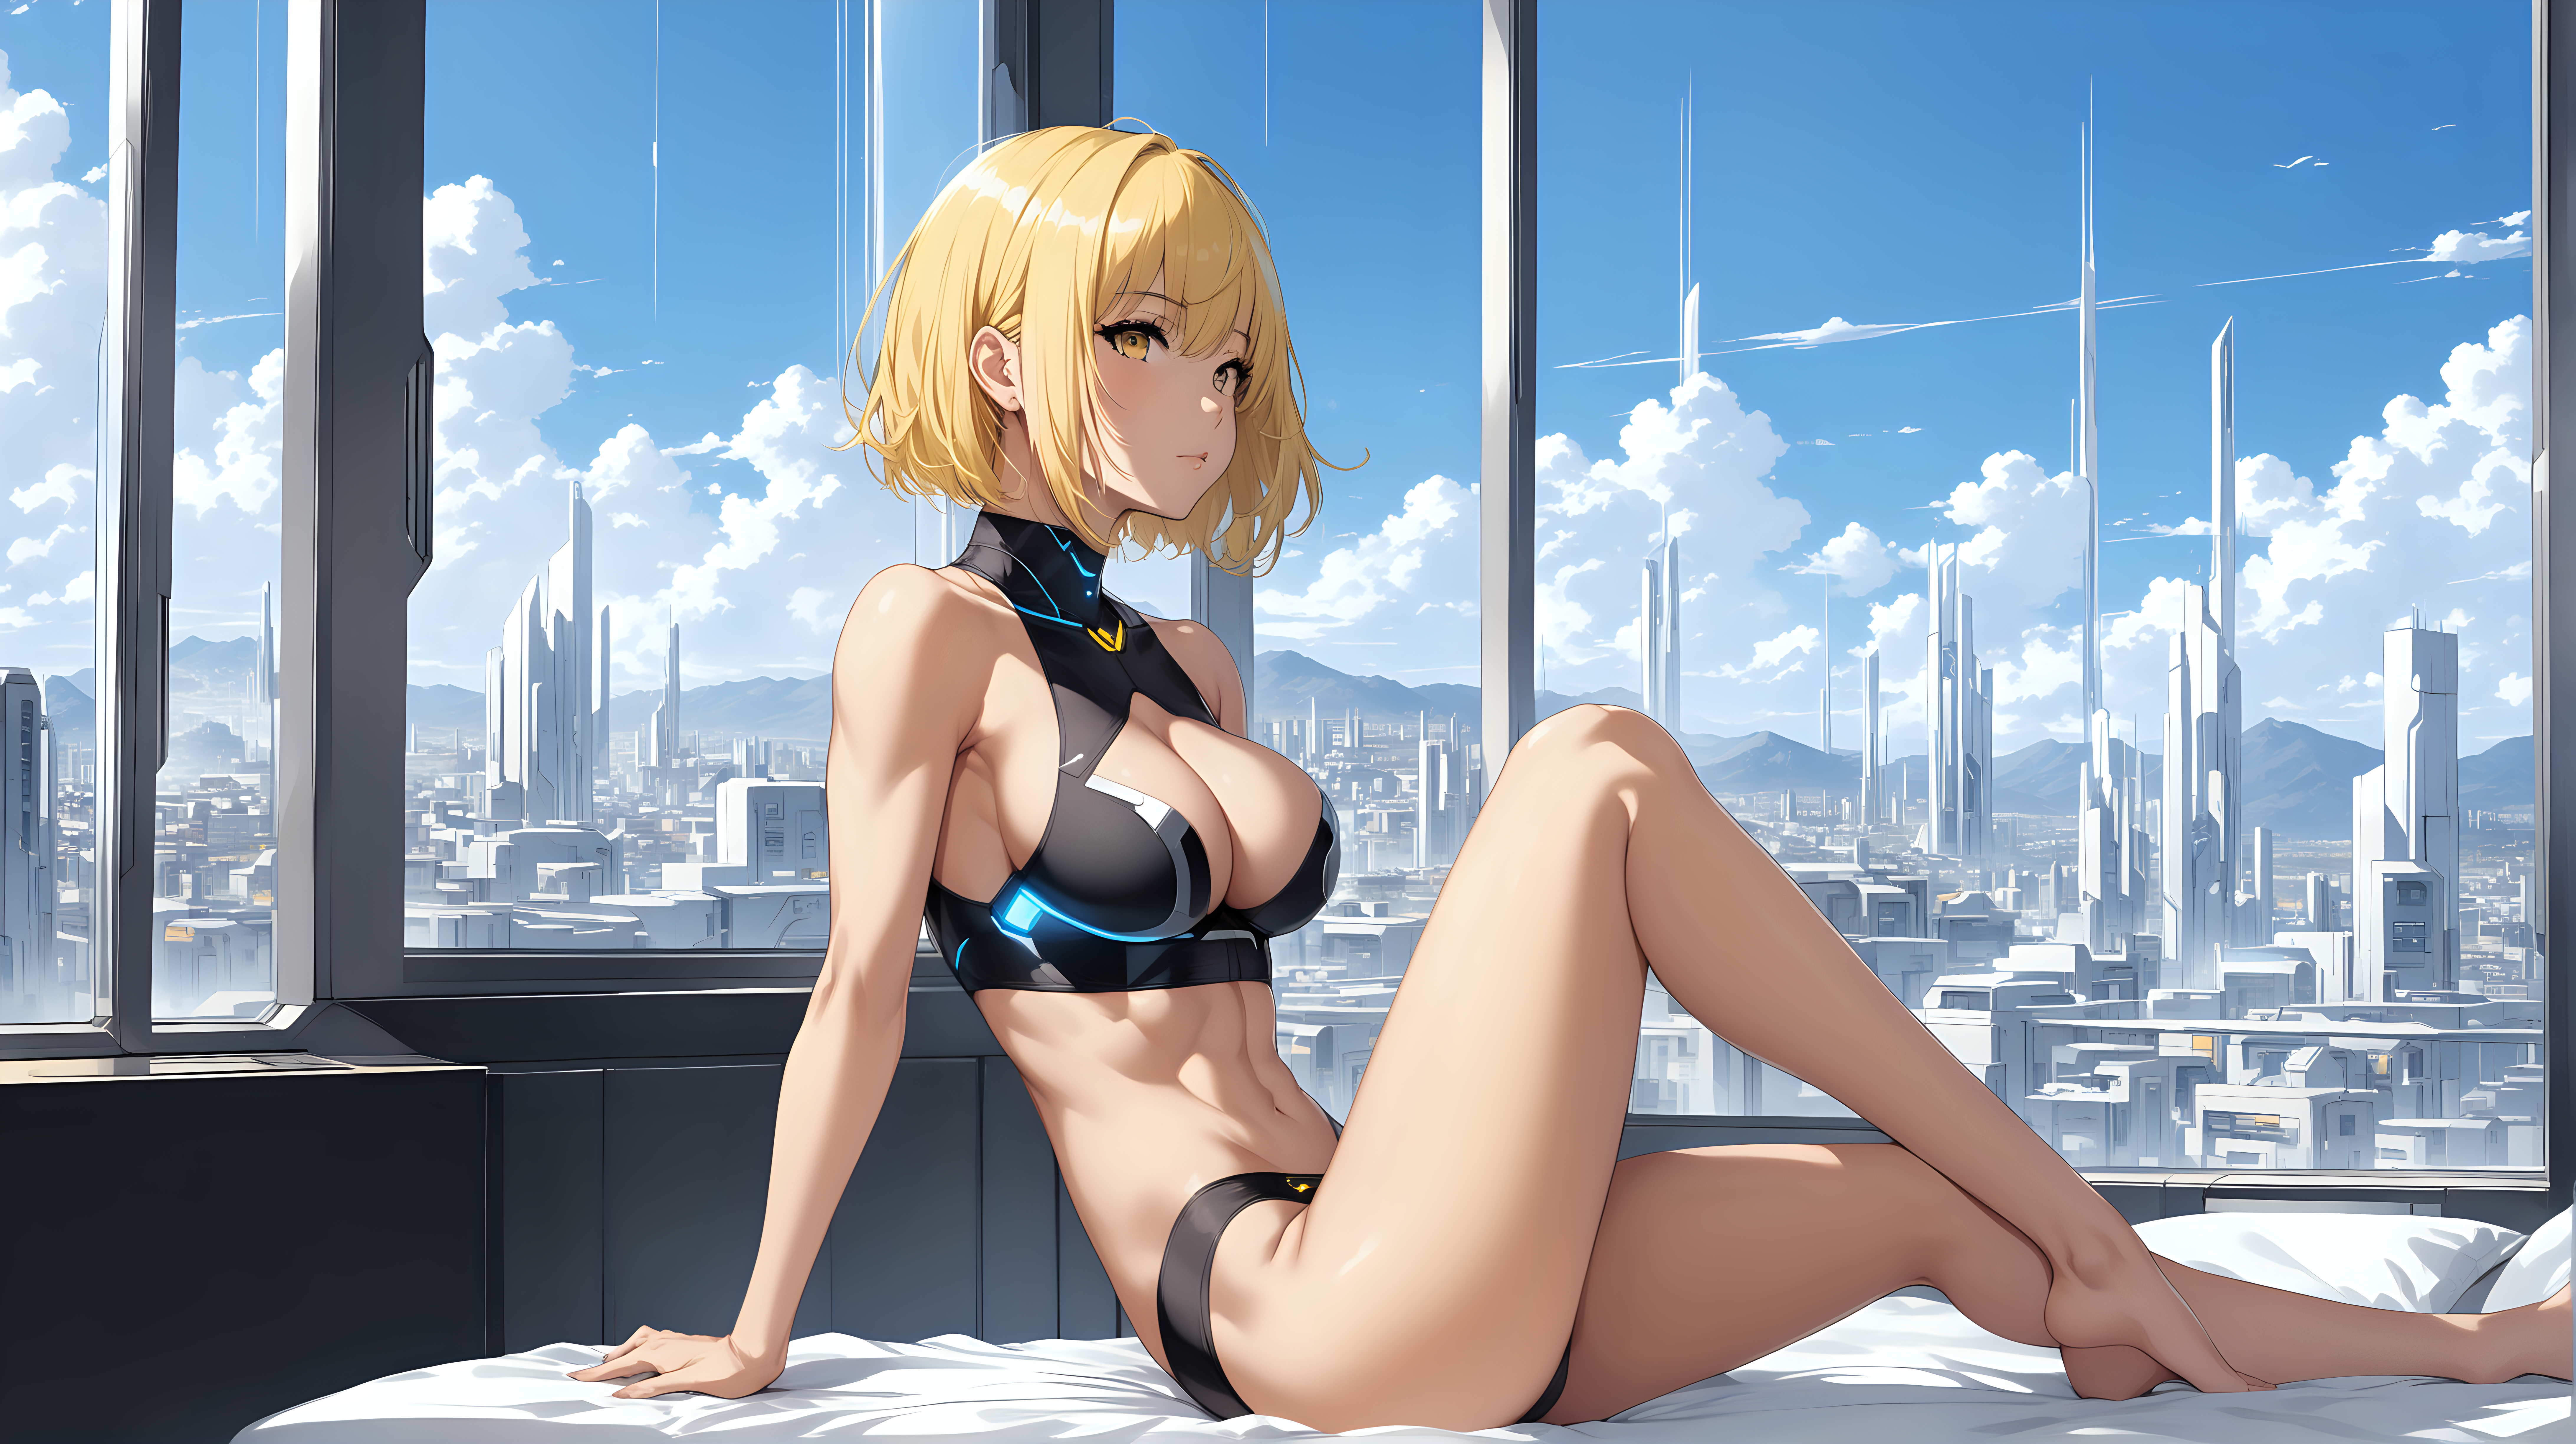 sexy fit 24 year old hero girl, short chin length yellow hair, sitting on edge of bed in futuristic apartment, exposed breasts, black panties, sexy toned body, blue sky and futuristic town in background through window, yellow black white 3 color minimal design